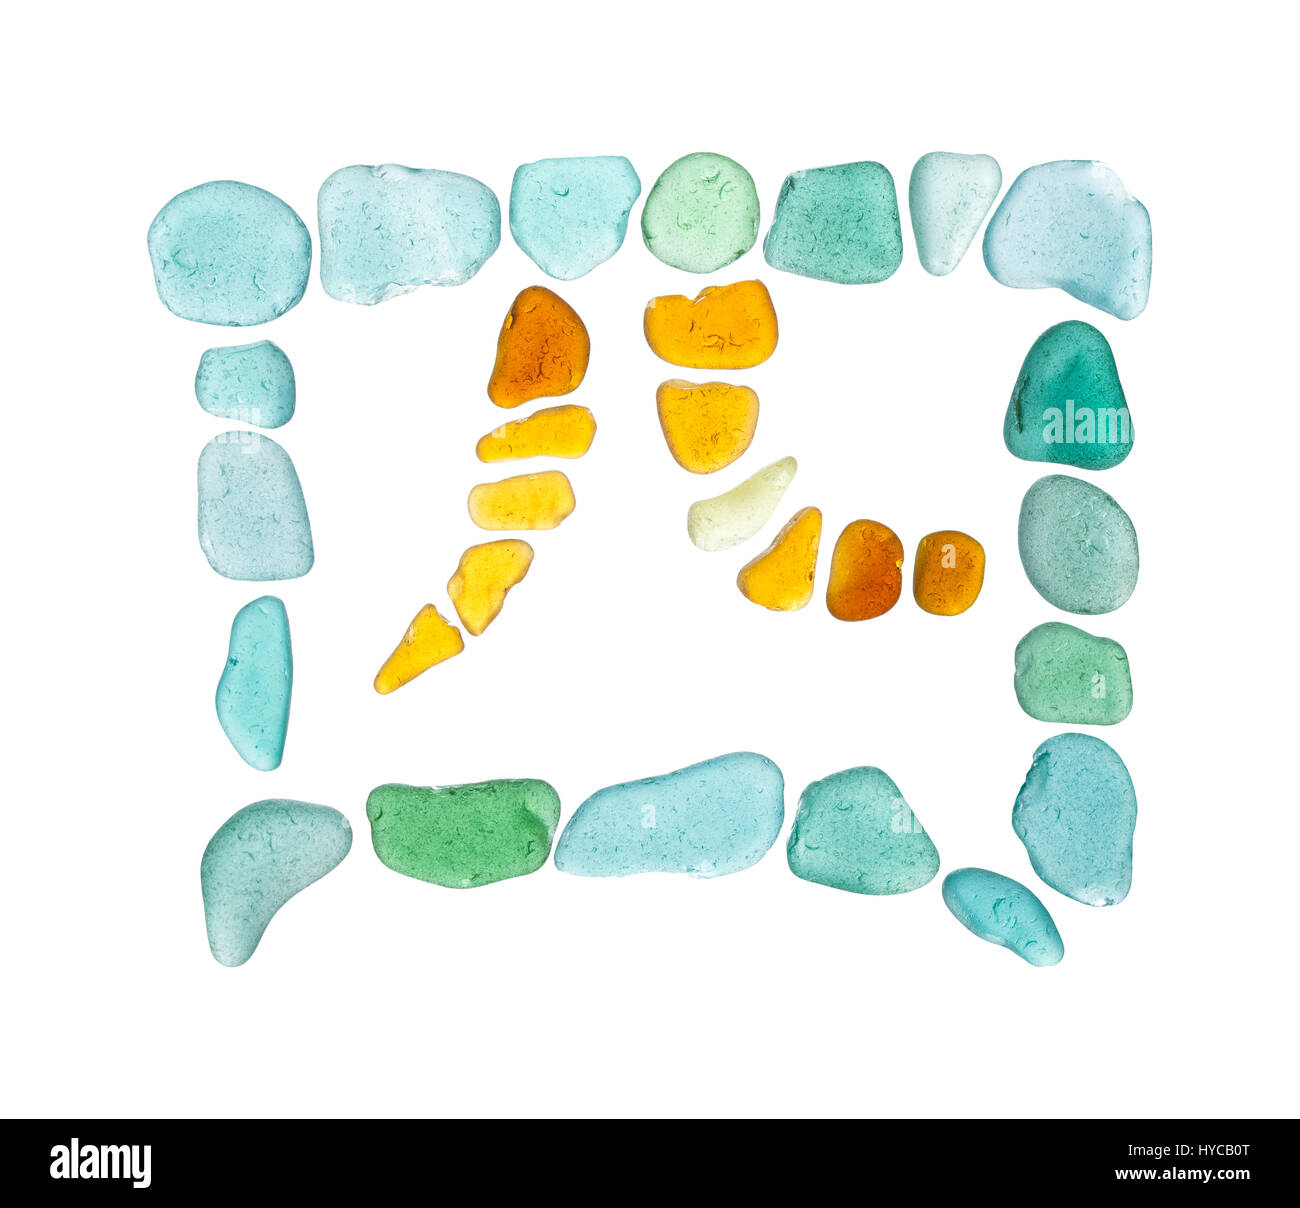 Chinese character si - four, sea glass mosaic Stock Photo